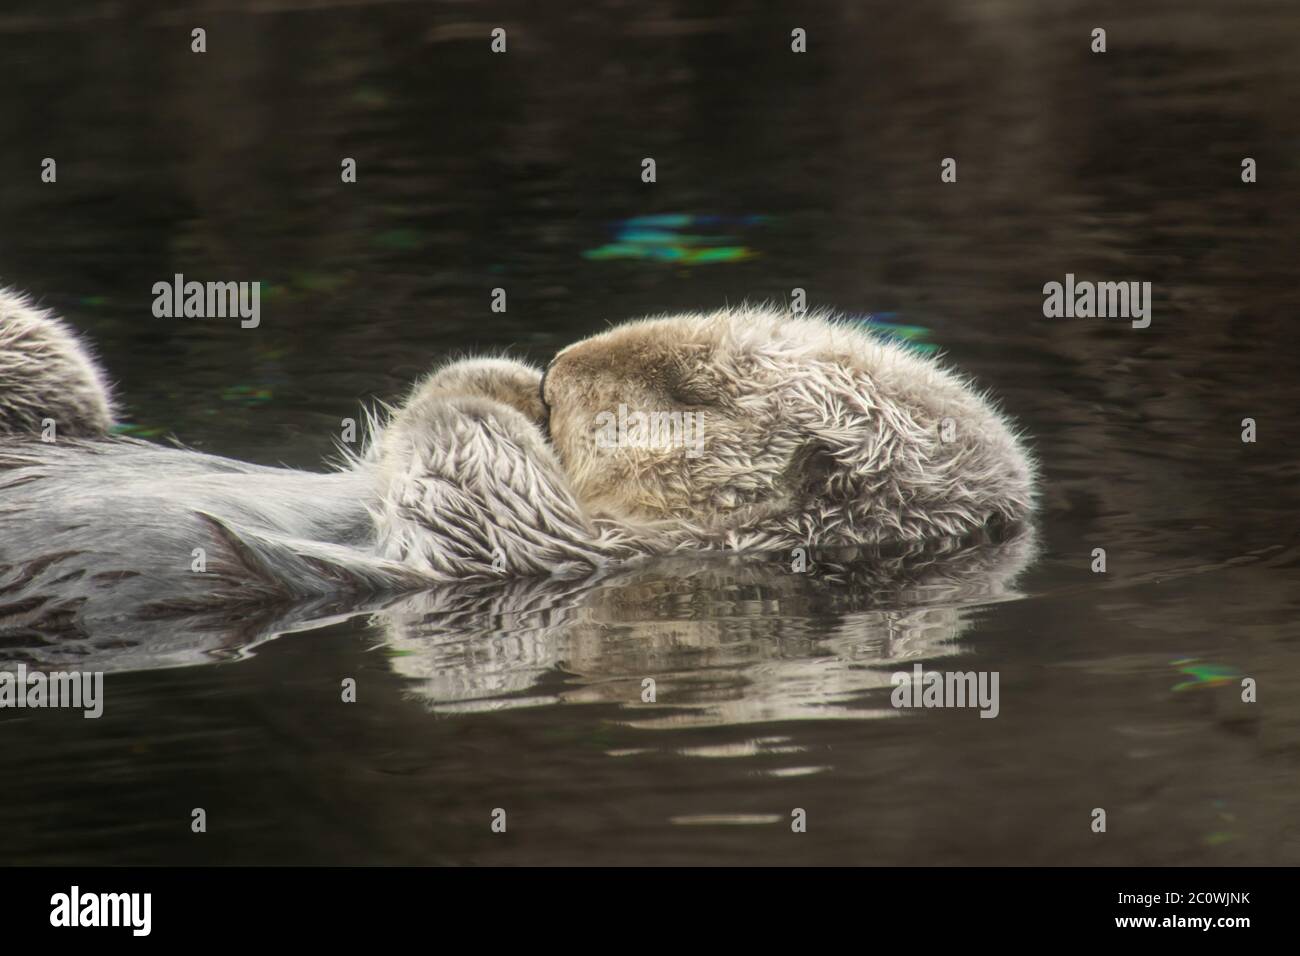 Closeup side view of a sleeping Sea Otter floating on it's back in water Stock Photo